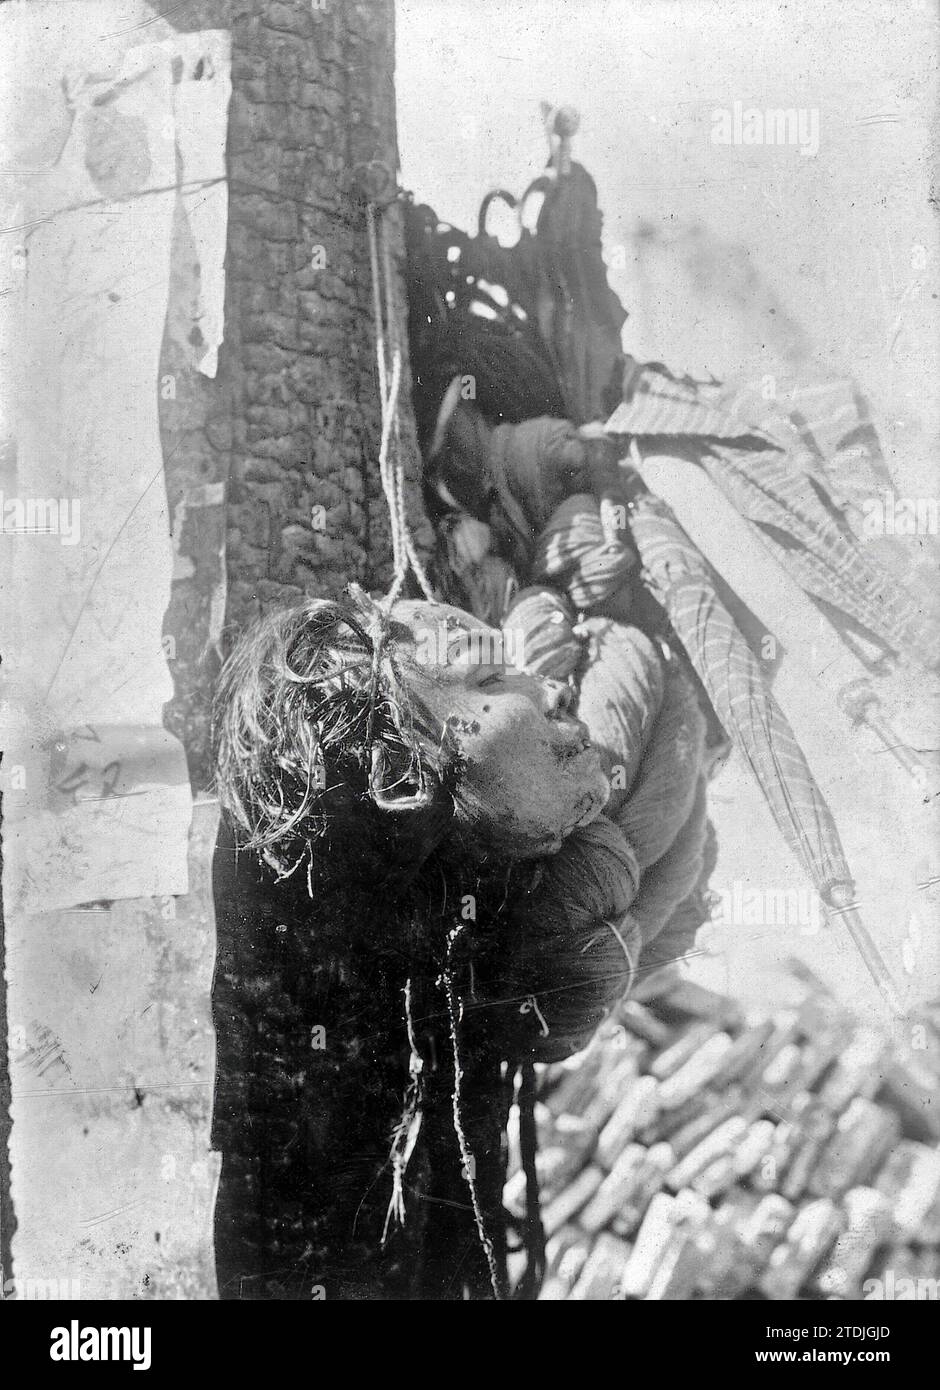 01/01/1912. Chinese Justice. Punishment of a thief for having stolen umbrellas which are seen hanging next to the head photo Han Kon. Credit: Album / Archivo ABC Stock Photo